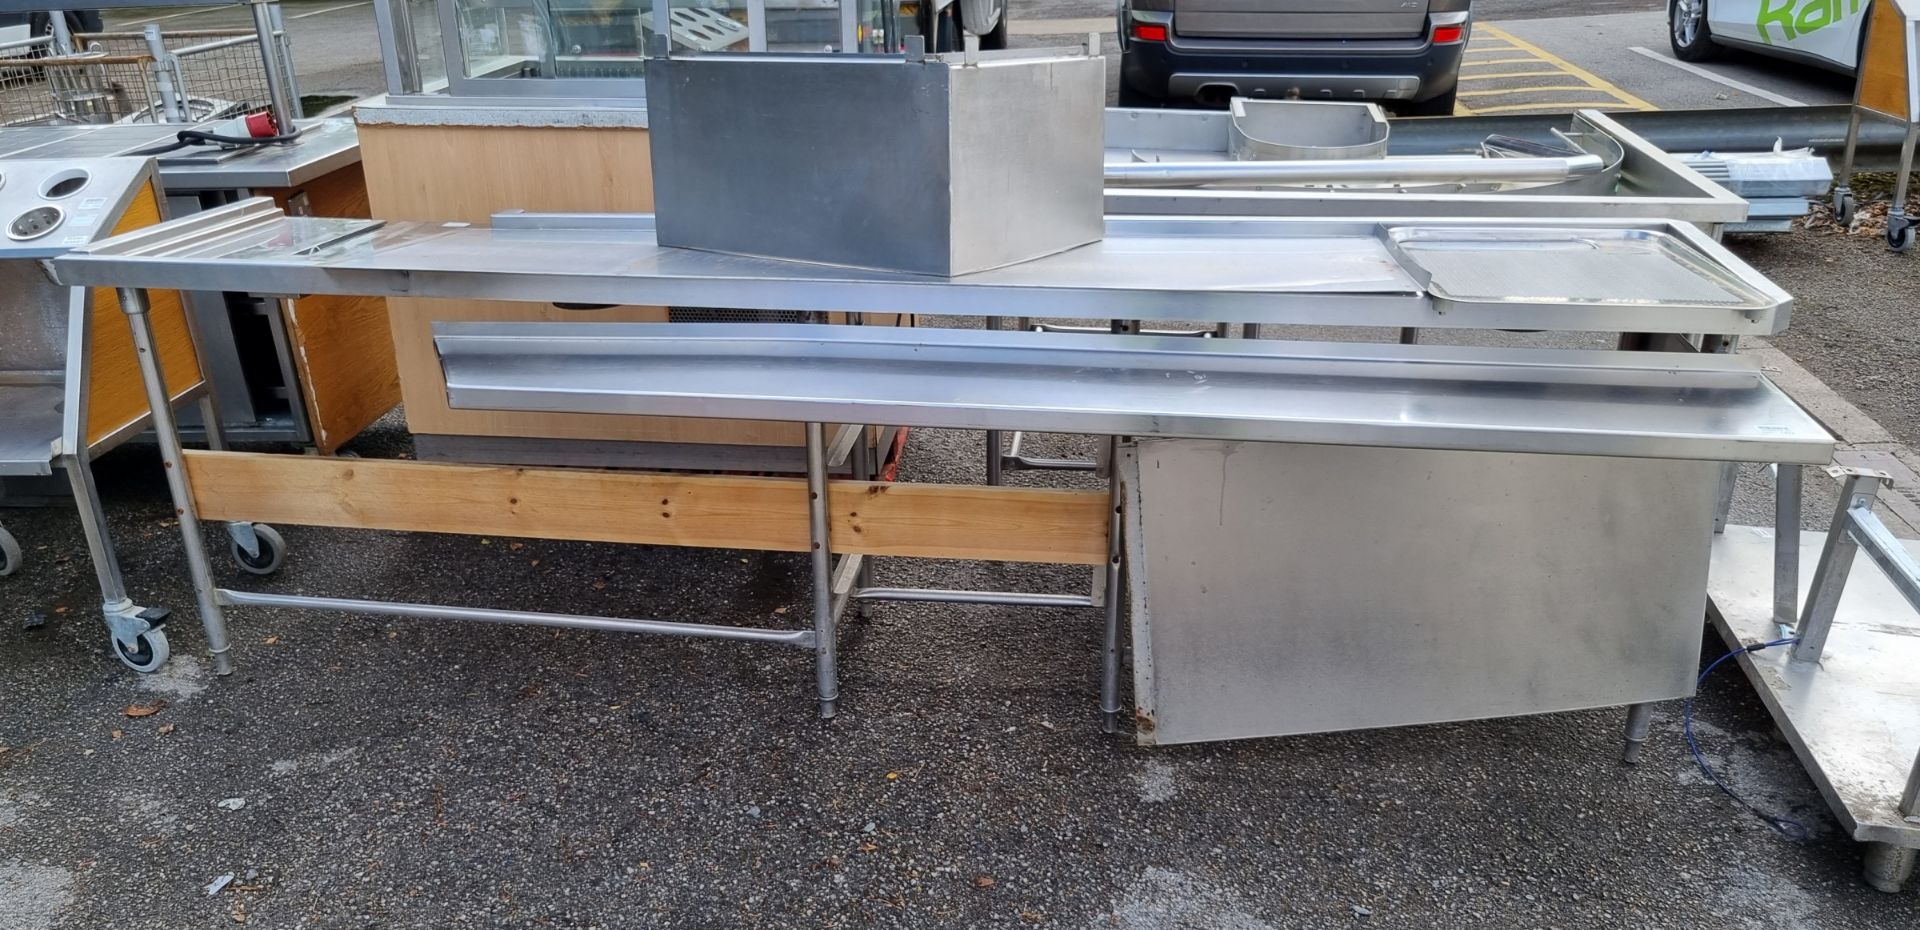 Stainless steel counter top unit with racking - W 3040 x D 900 x H 920mm